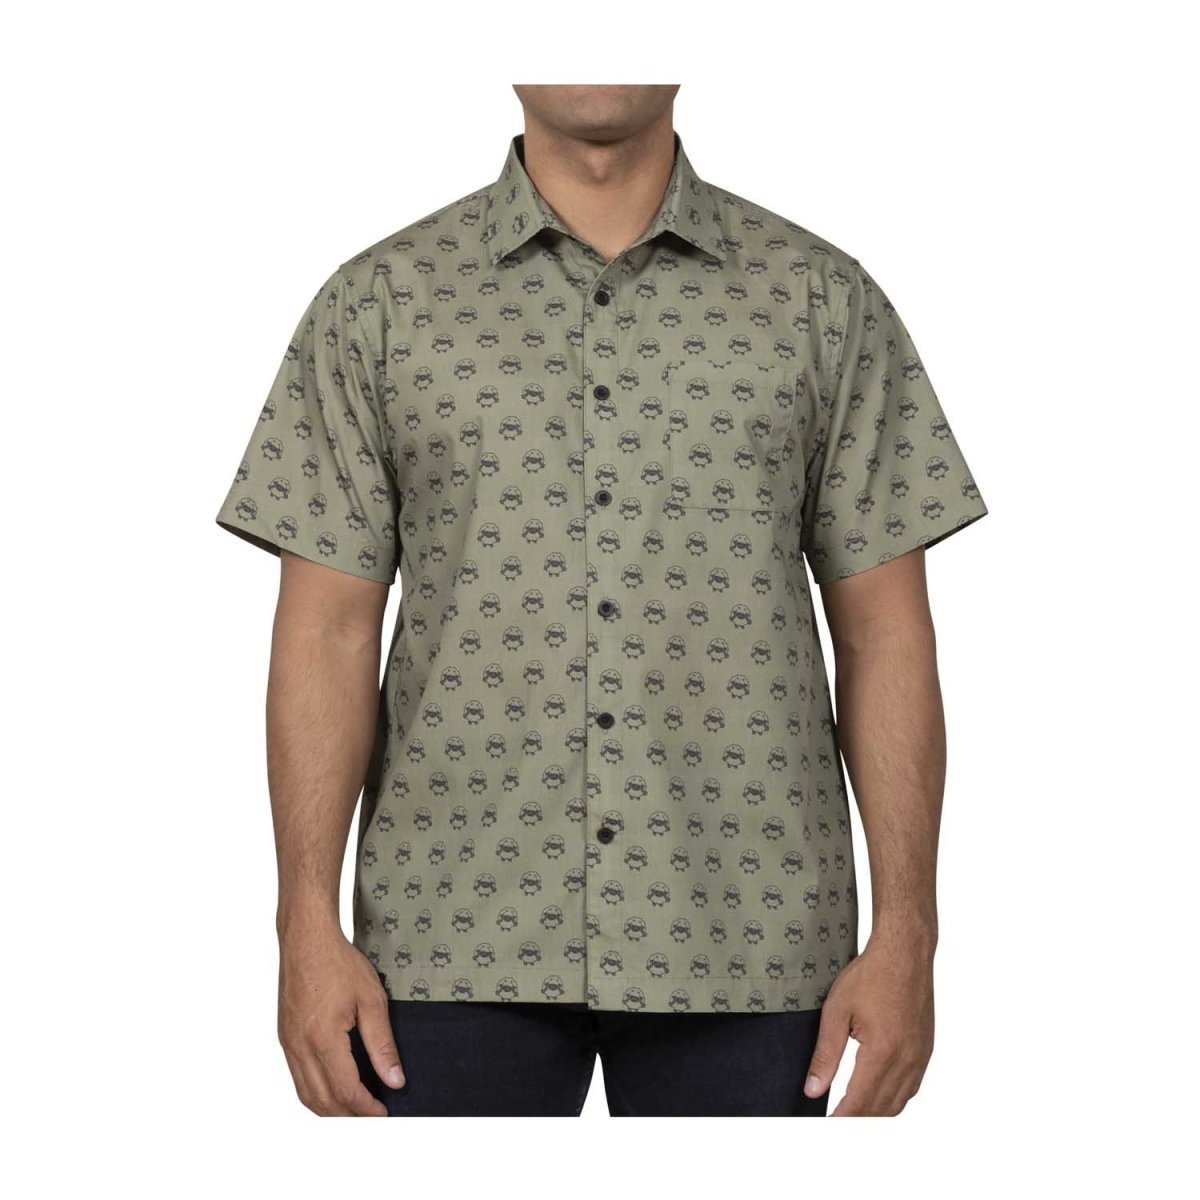 Wooloo Olive Short-Sleeve Button-Up Shirt - Adult